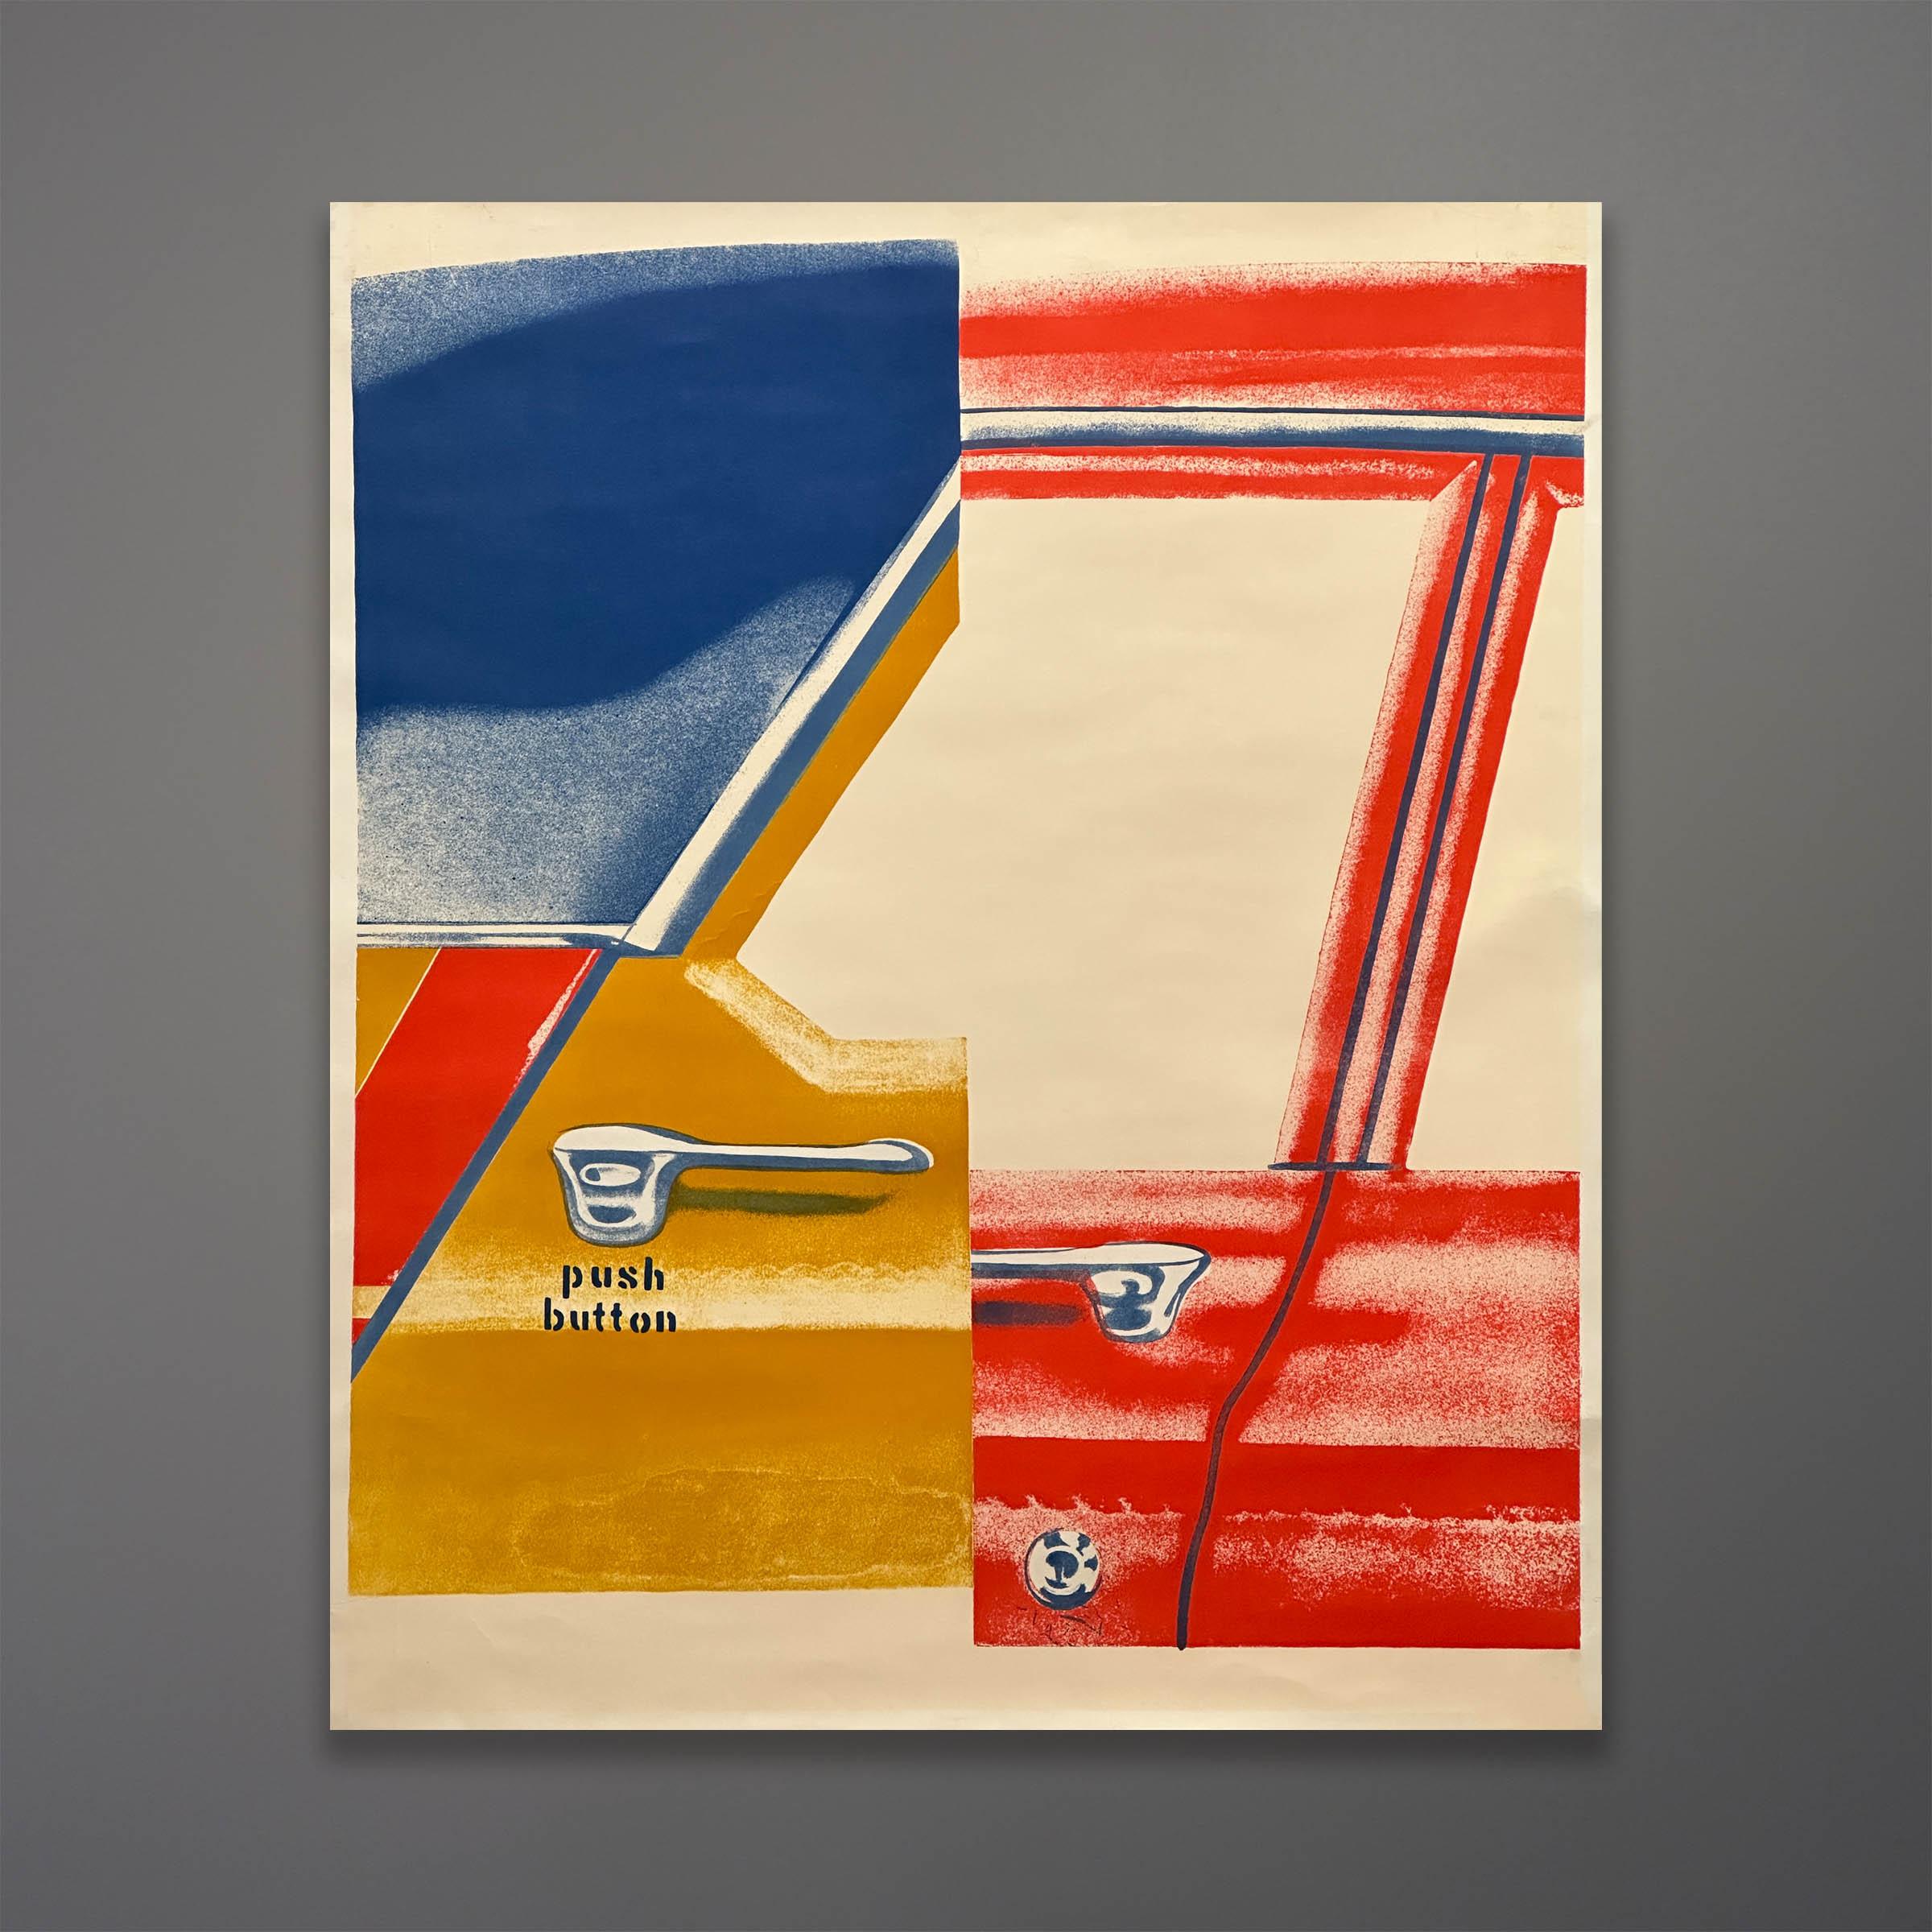 “Roll Down” is the title of the artwork by James Rosenquist, done in 1965. This is a color lithograph printed on wove art paper. Each color was printed from an individual plate, much like a silkscreen print. 18 × 22 inches. The Art Institute of